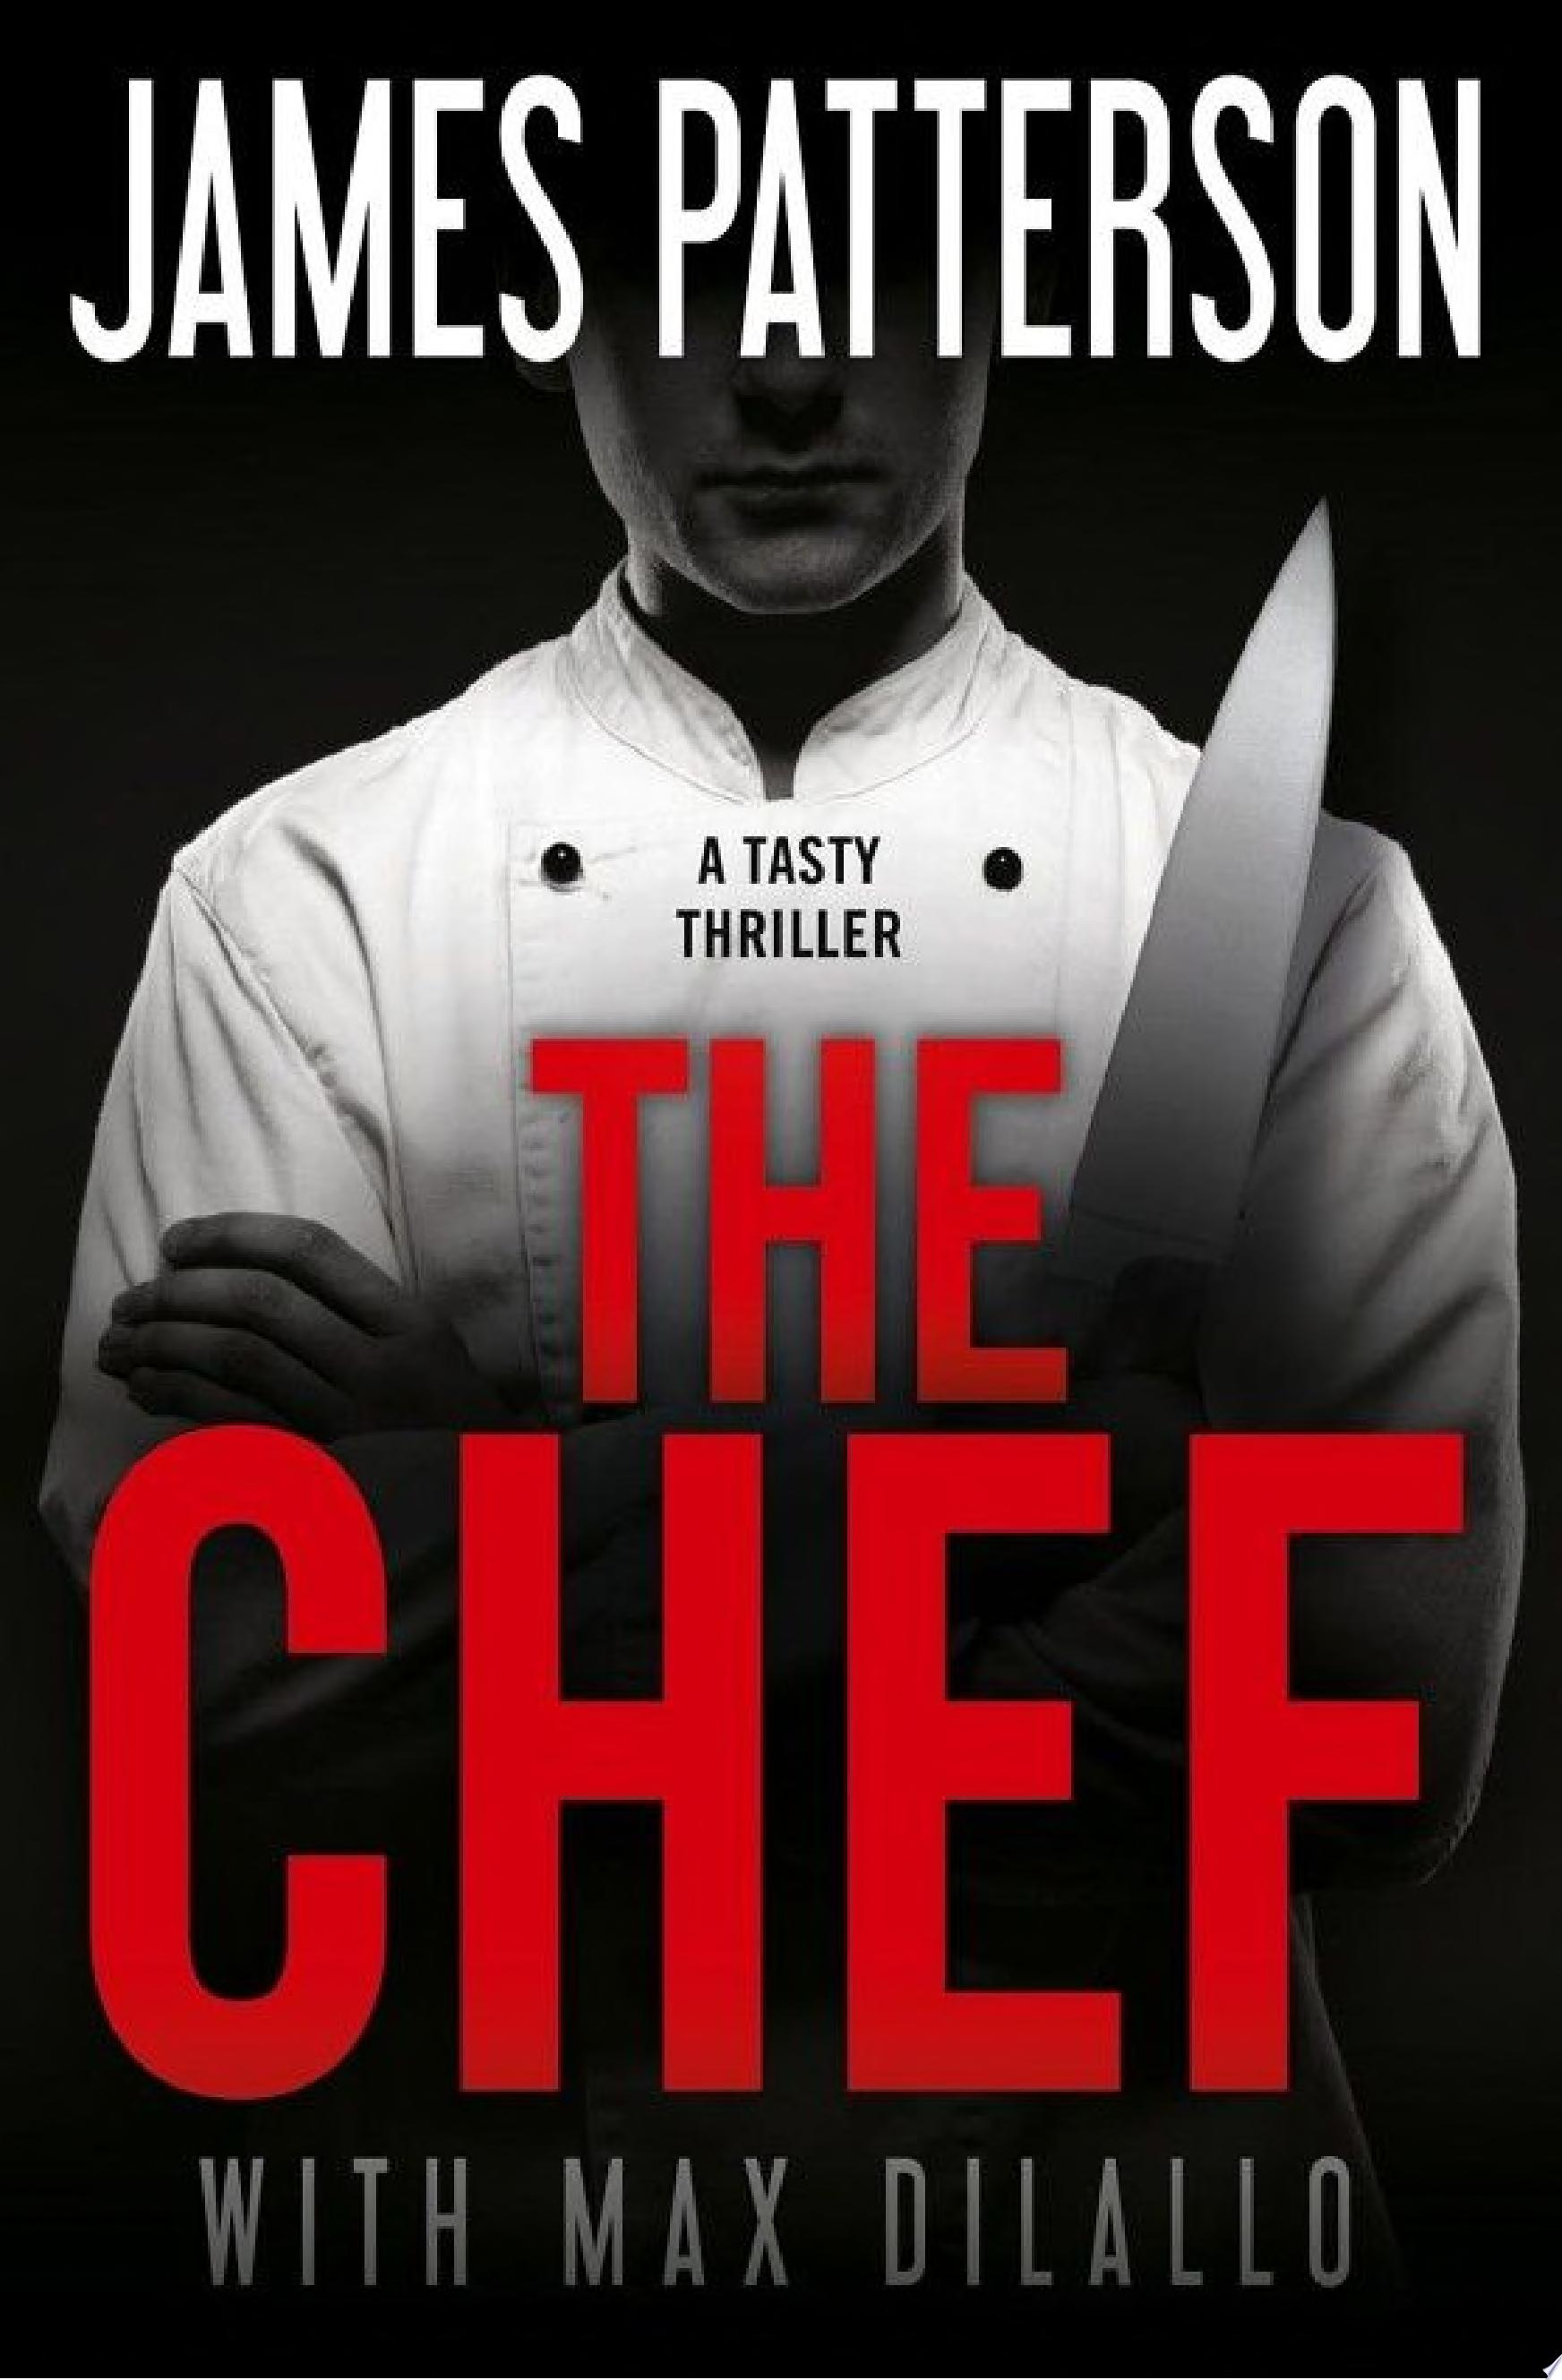 Image for "The Chef"